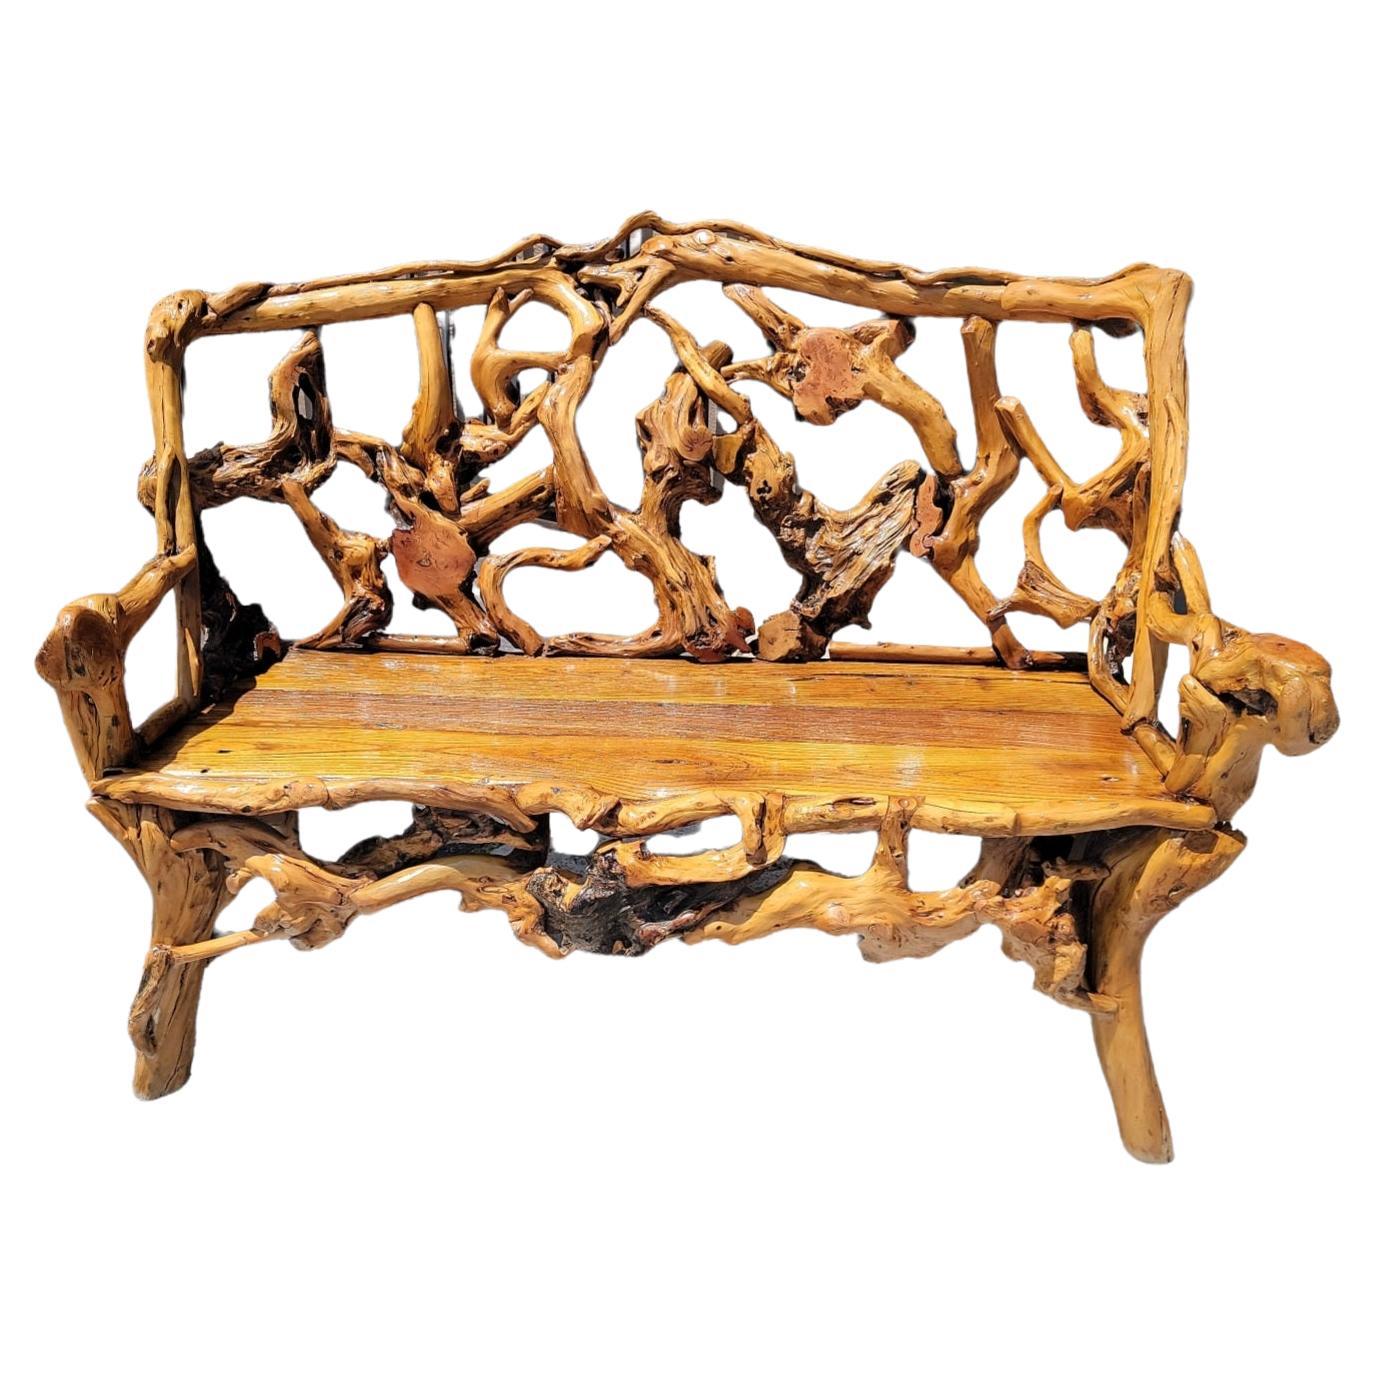 Early 20thc Root / Twig Settee from a Ranch